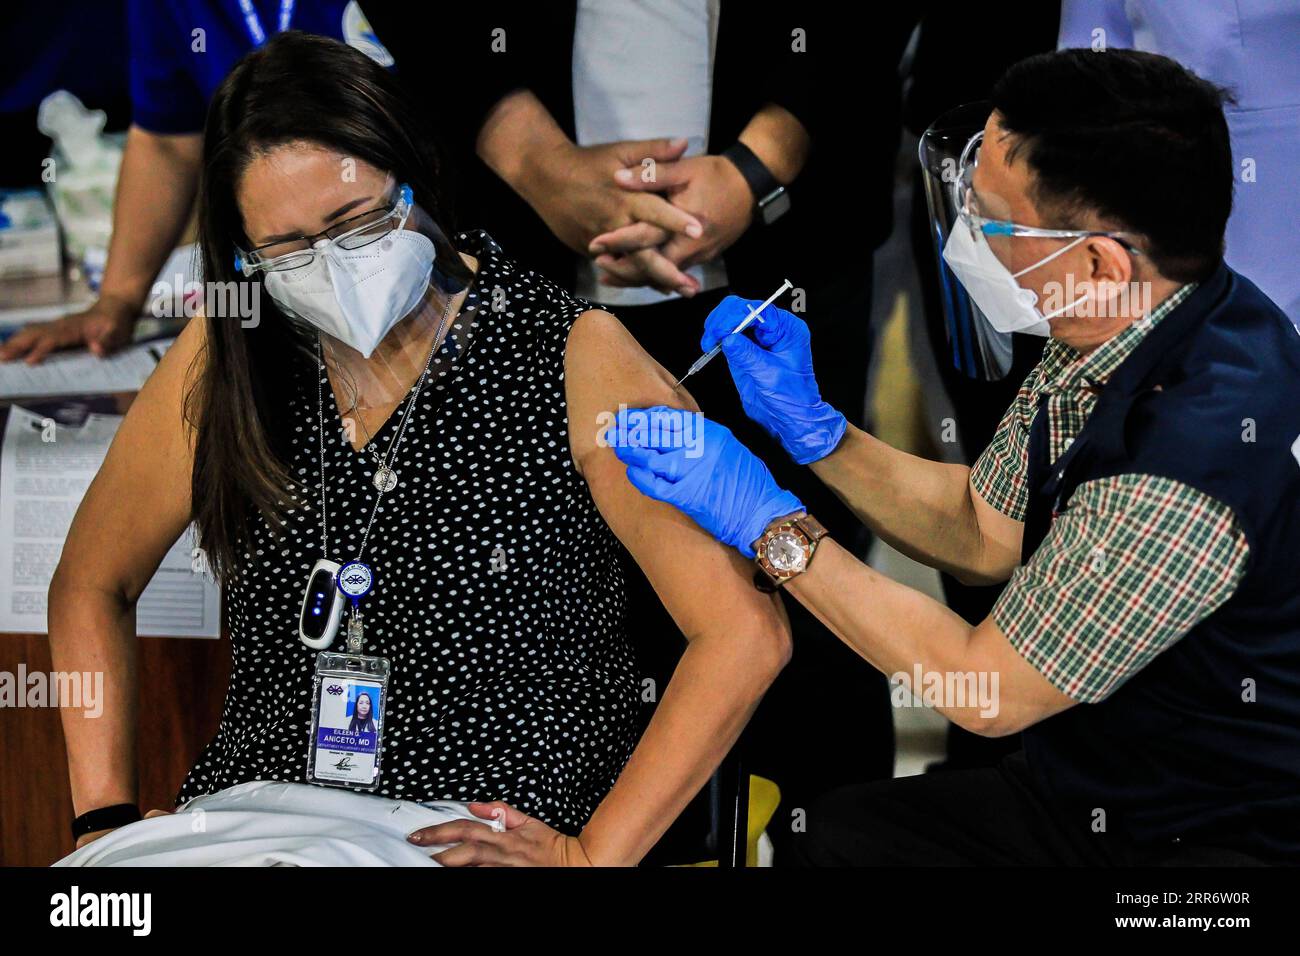 210301 -- MANILA, March 1, 2021 -- Philippine Department of Health Secretary Francisco Duque III injects a shot of COVID-19 vaccine from China s Sinovac to a doctor on the first day of the vaccination at the Lung Center of the Philippines in Manila, the Philippines on March 1, 2021. The Philippines launched its coronavirus vaccination campaign on Monday, less than a day after the arrival of the Sinovac vaccine CoronaVac donated by China.  PHILIPPINES-MANILA-COVID-19-VACCINATION ROUELLExUMALI PUBLICATIONxNOTxINxCHN Stock Photo